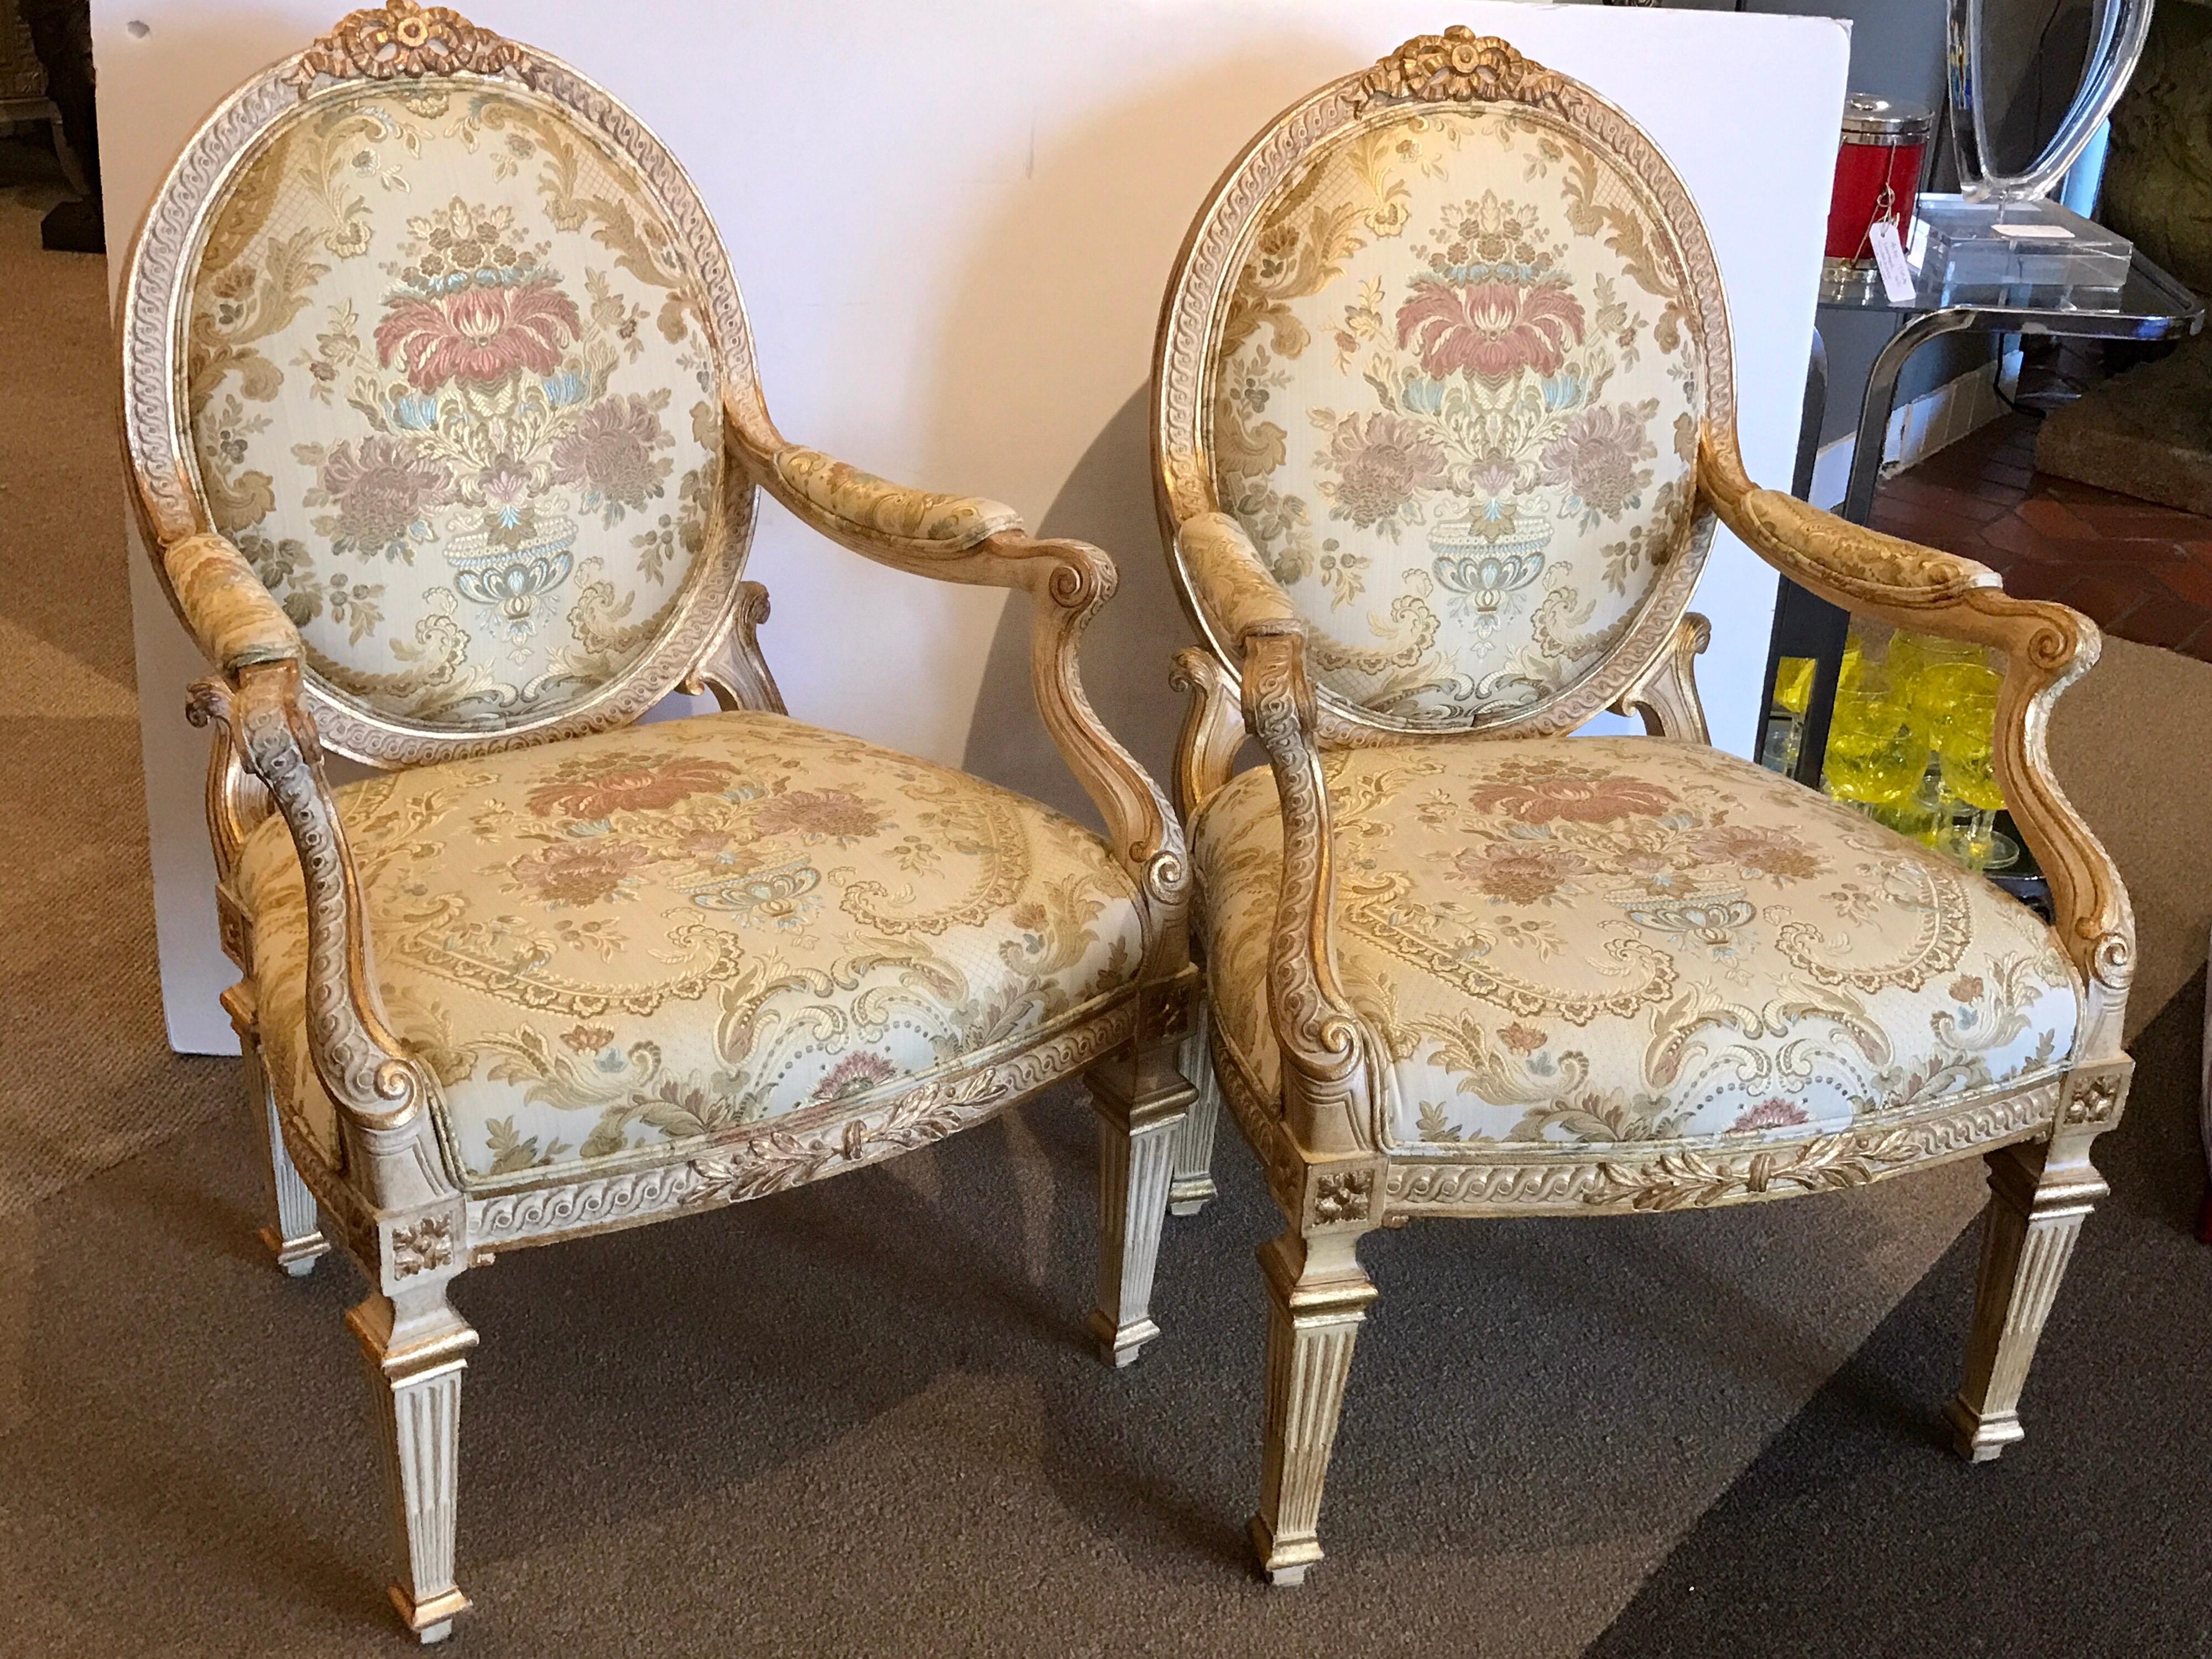 Pair of Louis XVI Style Carved Giltwood Bergère Chairs with Scalamandre Fabric (Louis XVI.) im Angebot